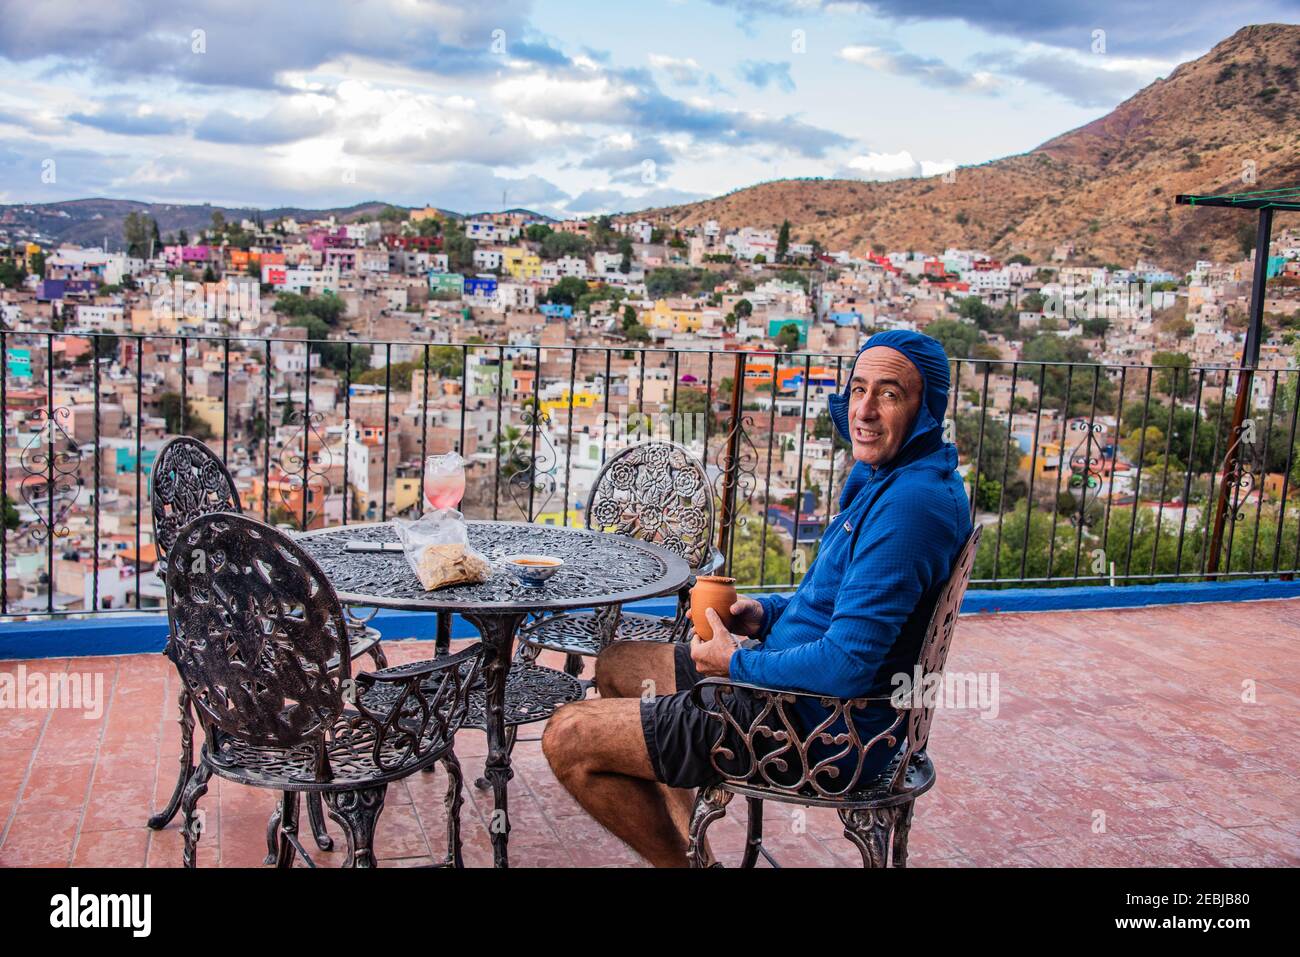 Drinking a glass of margarita with the view of the UNESCO World Heritage Centro Historico in Guanajuato, Mexico Stock Photo